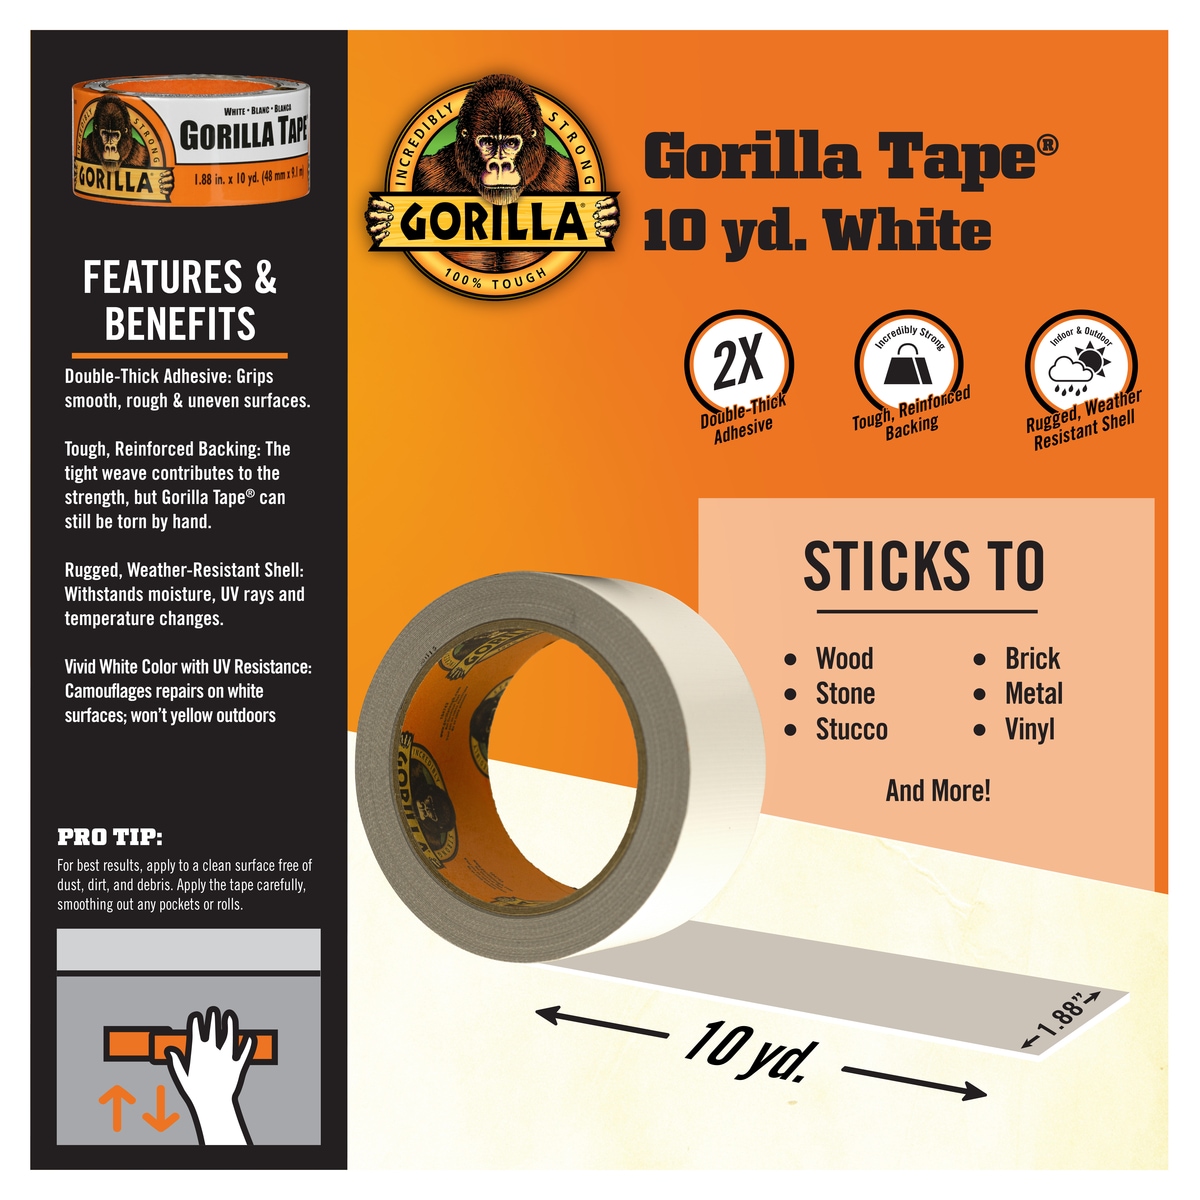 Gorilla 1.41-in x 8 Yard(s) Double-Sided Tape in the Double-Sided